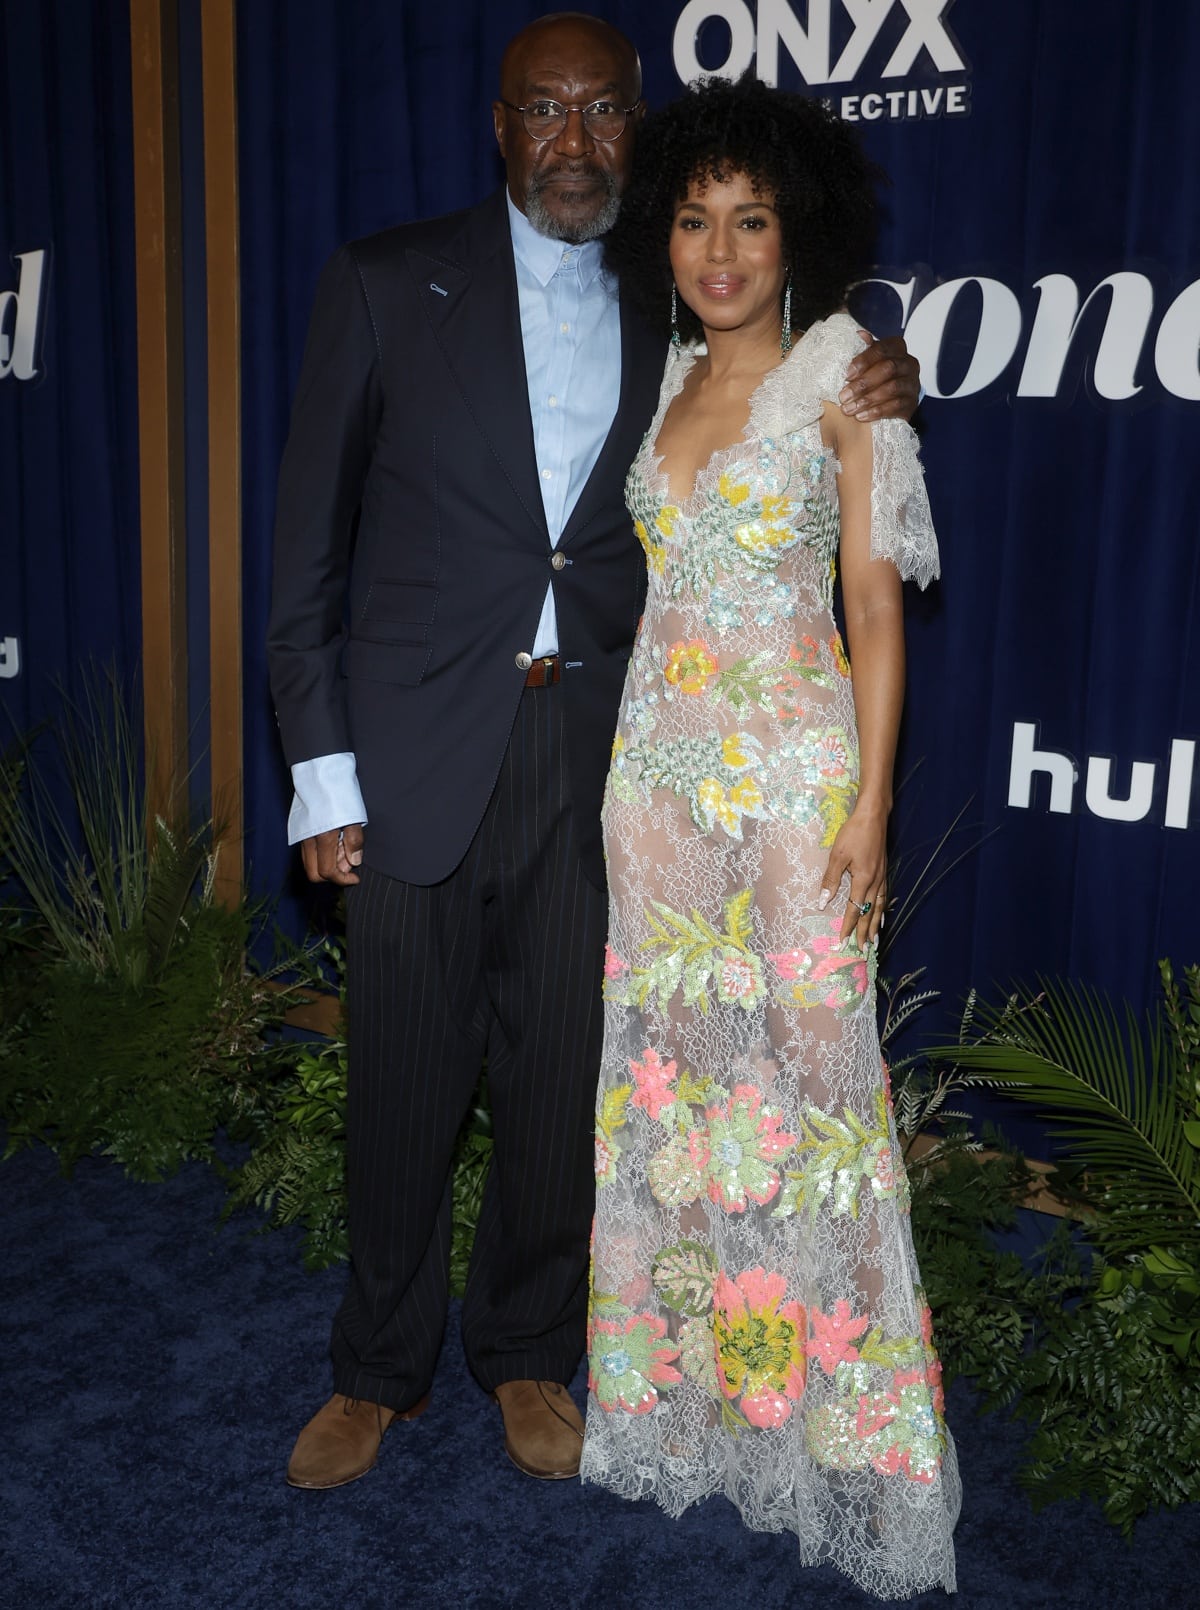 Delroy Lindo and Kerry Washington at the Los Angeles premiere of UnPrisoned